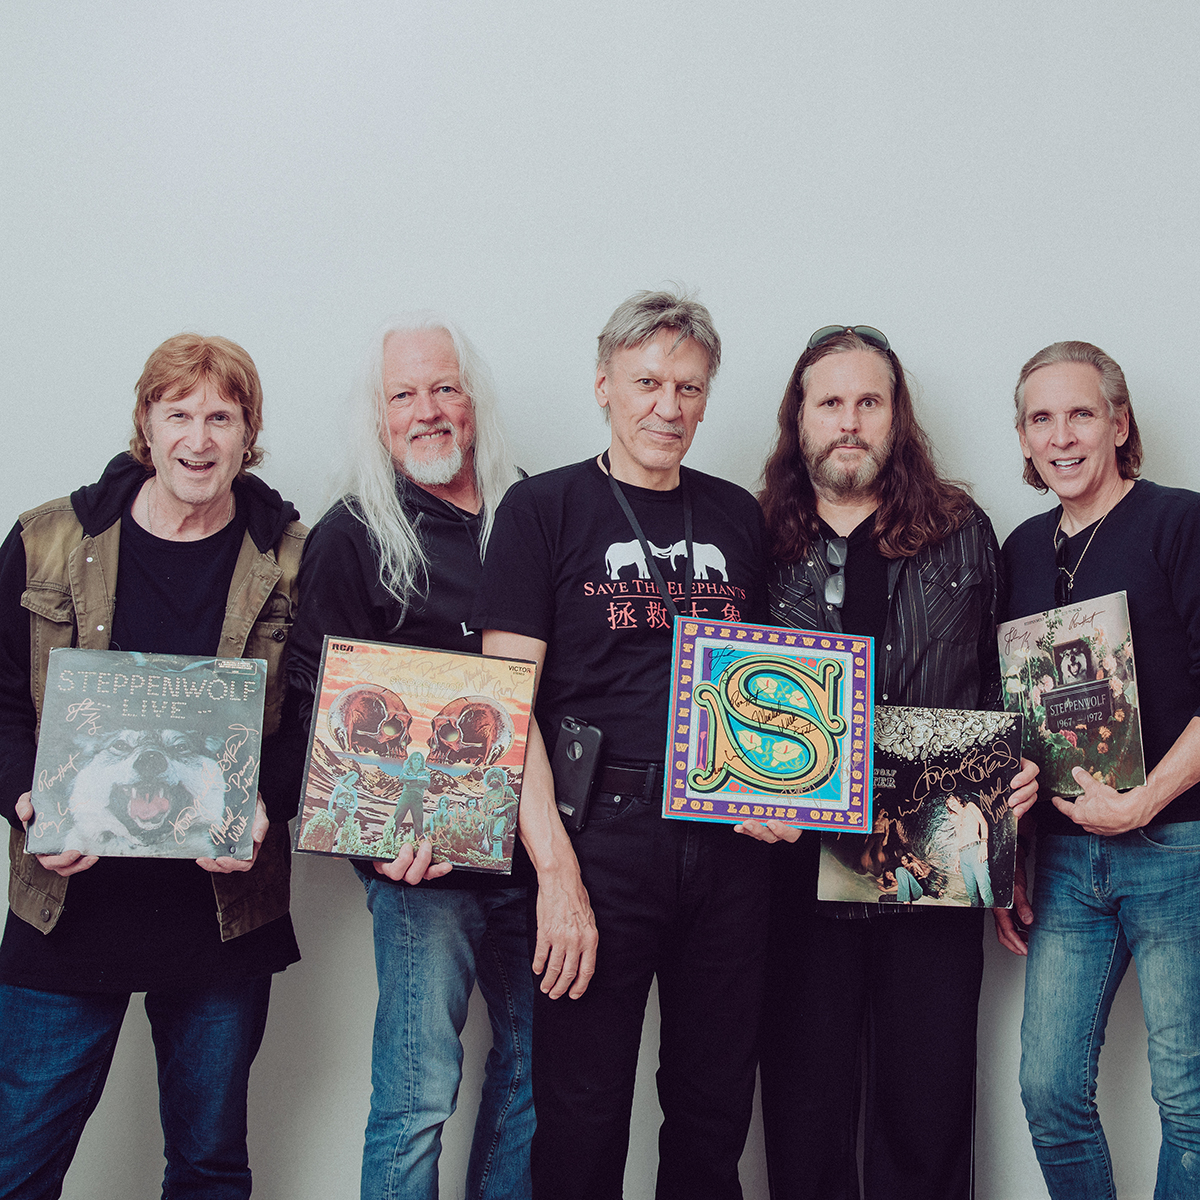 john kay and steppenwof final band photo posing with records.jpg